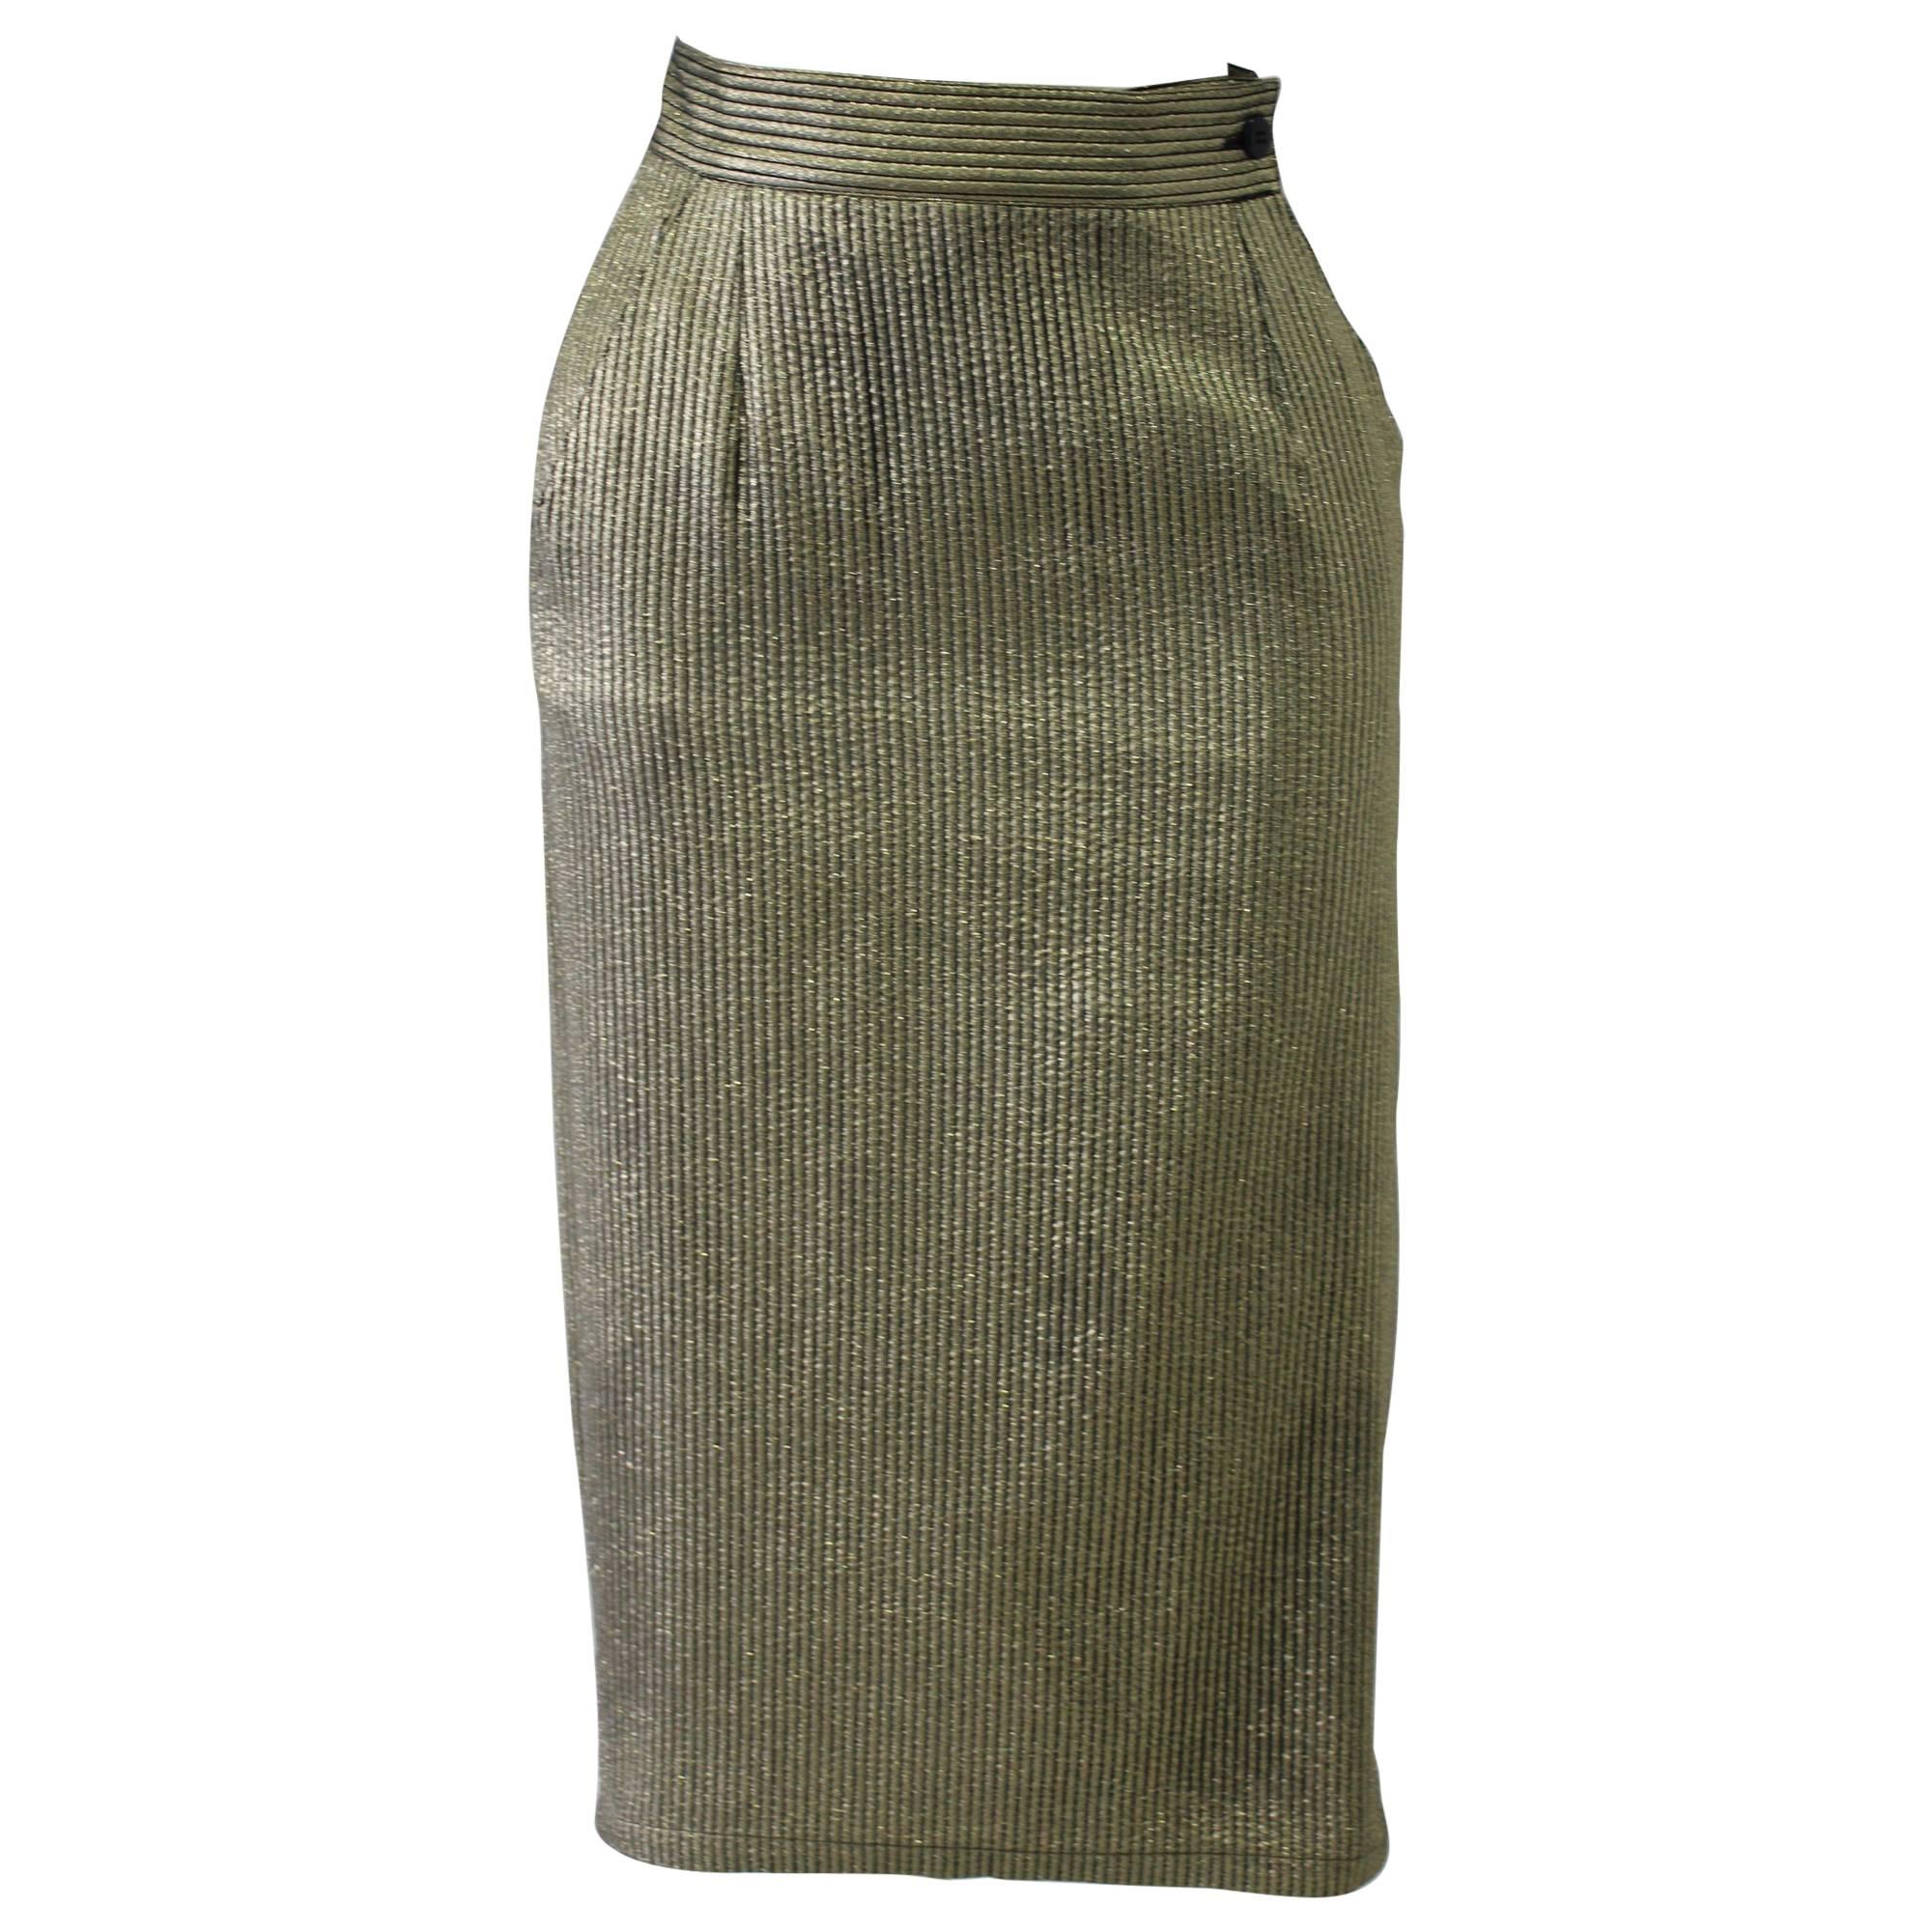 Early Gianni Versace Brocade Gold Lurex Skirt For Sale